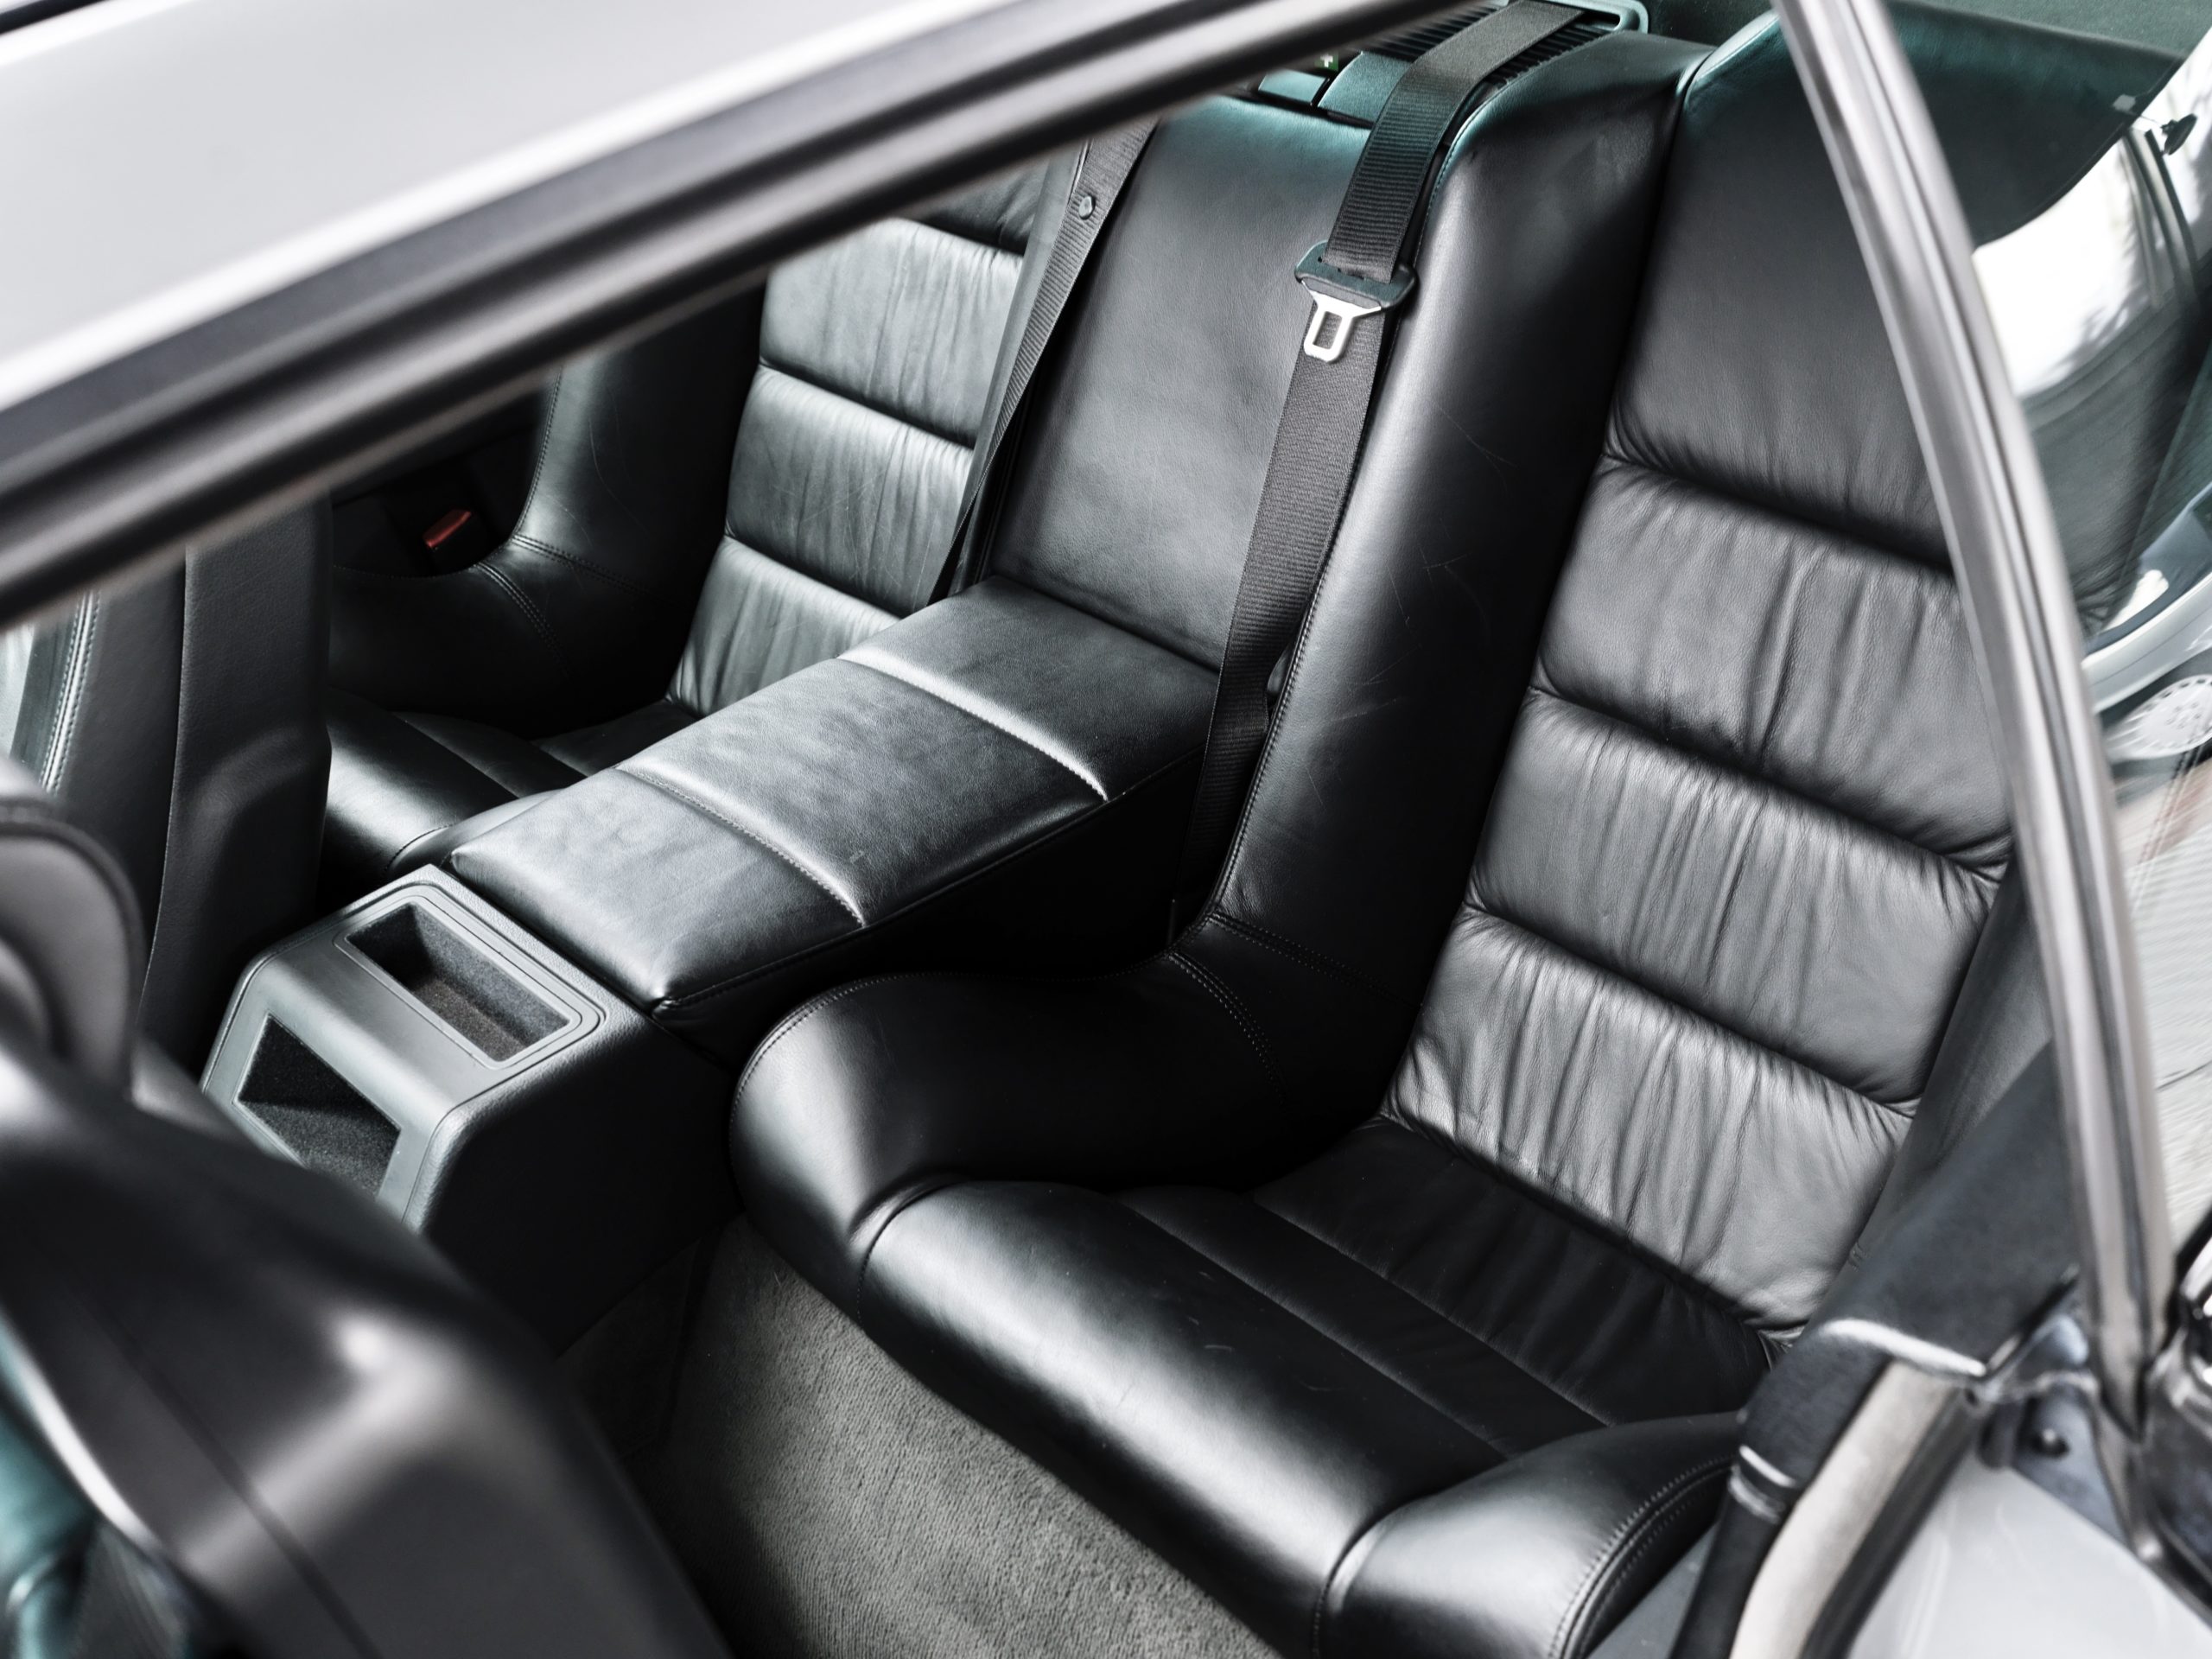 inside view of a 1991 BMW 850i 6 speed manual with black leather seats for sale with Classic 42 Belgium